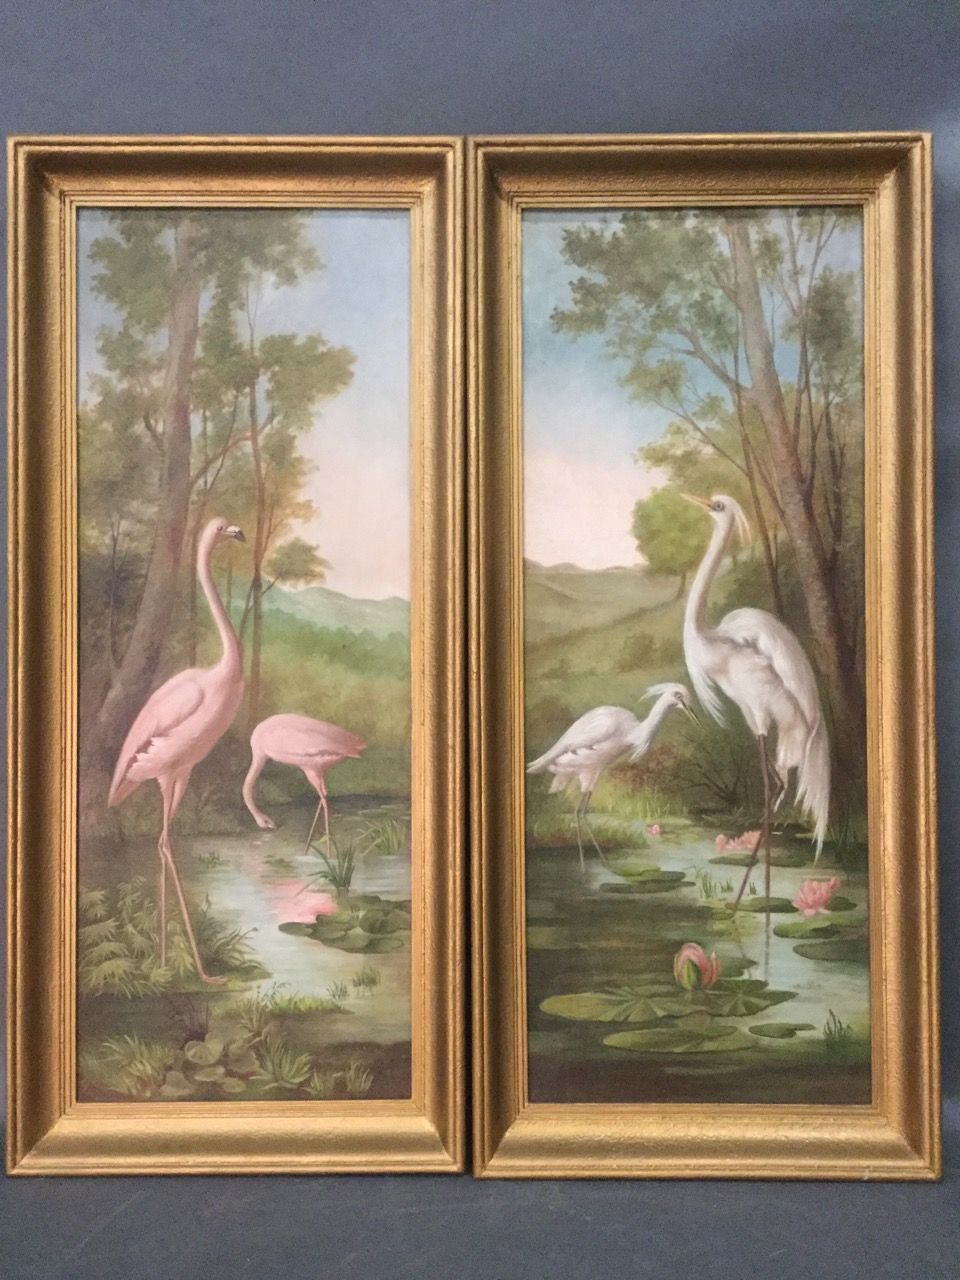 Attributed to M. BARBERIN, Ibis and pink flamingos, pair of HST, dim. 92 x 34 cm&hellip;